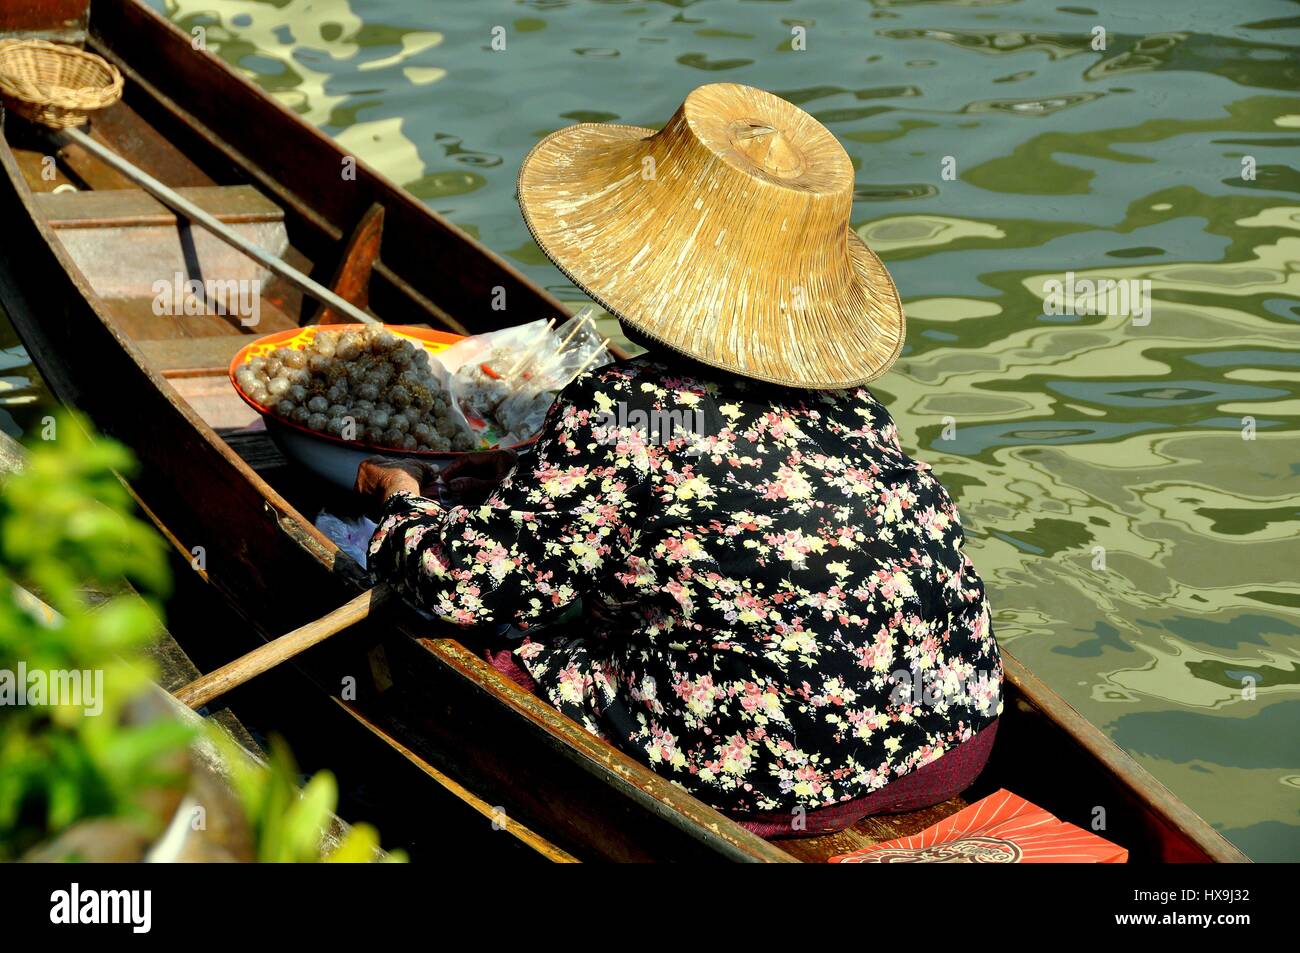 Amphawa, Thailand - December 17, 2010:  Thai woman wearing a straw hat sits in her boat selling fish balls at the Amphawa floating market Stock Photo